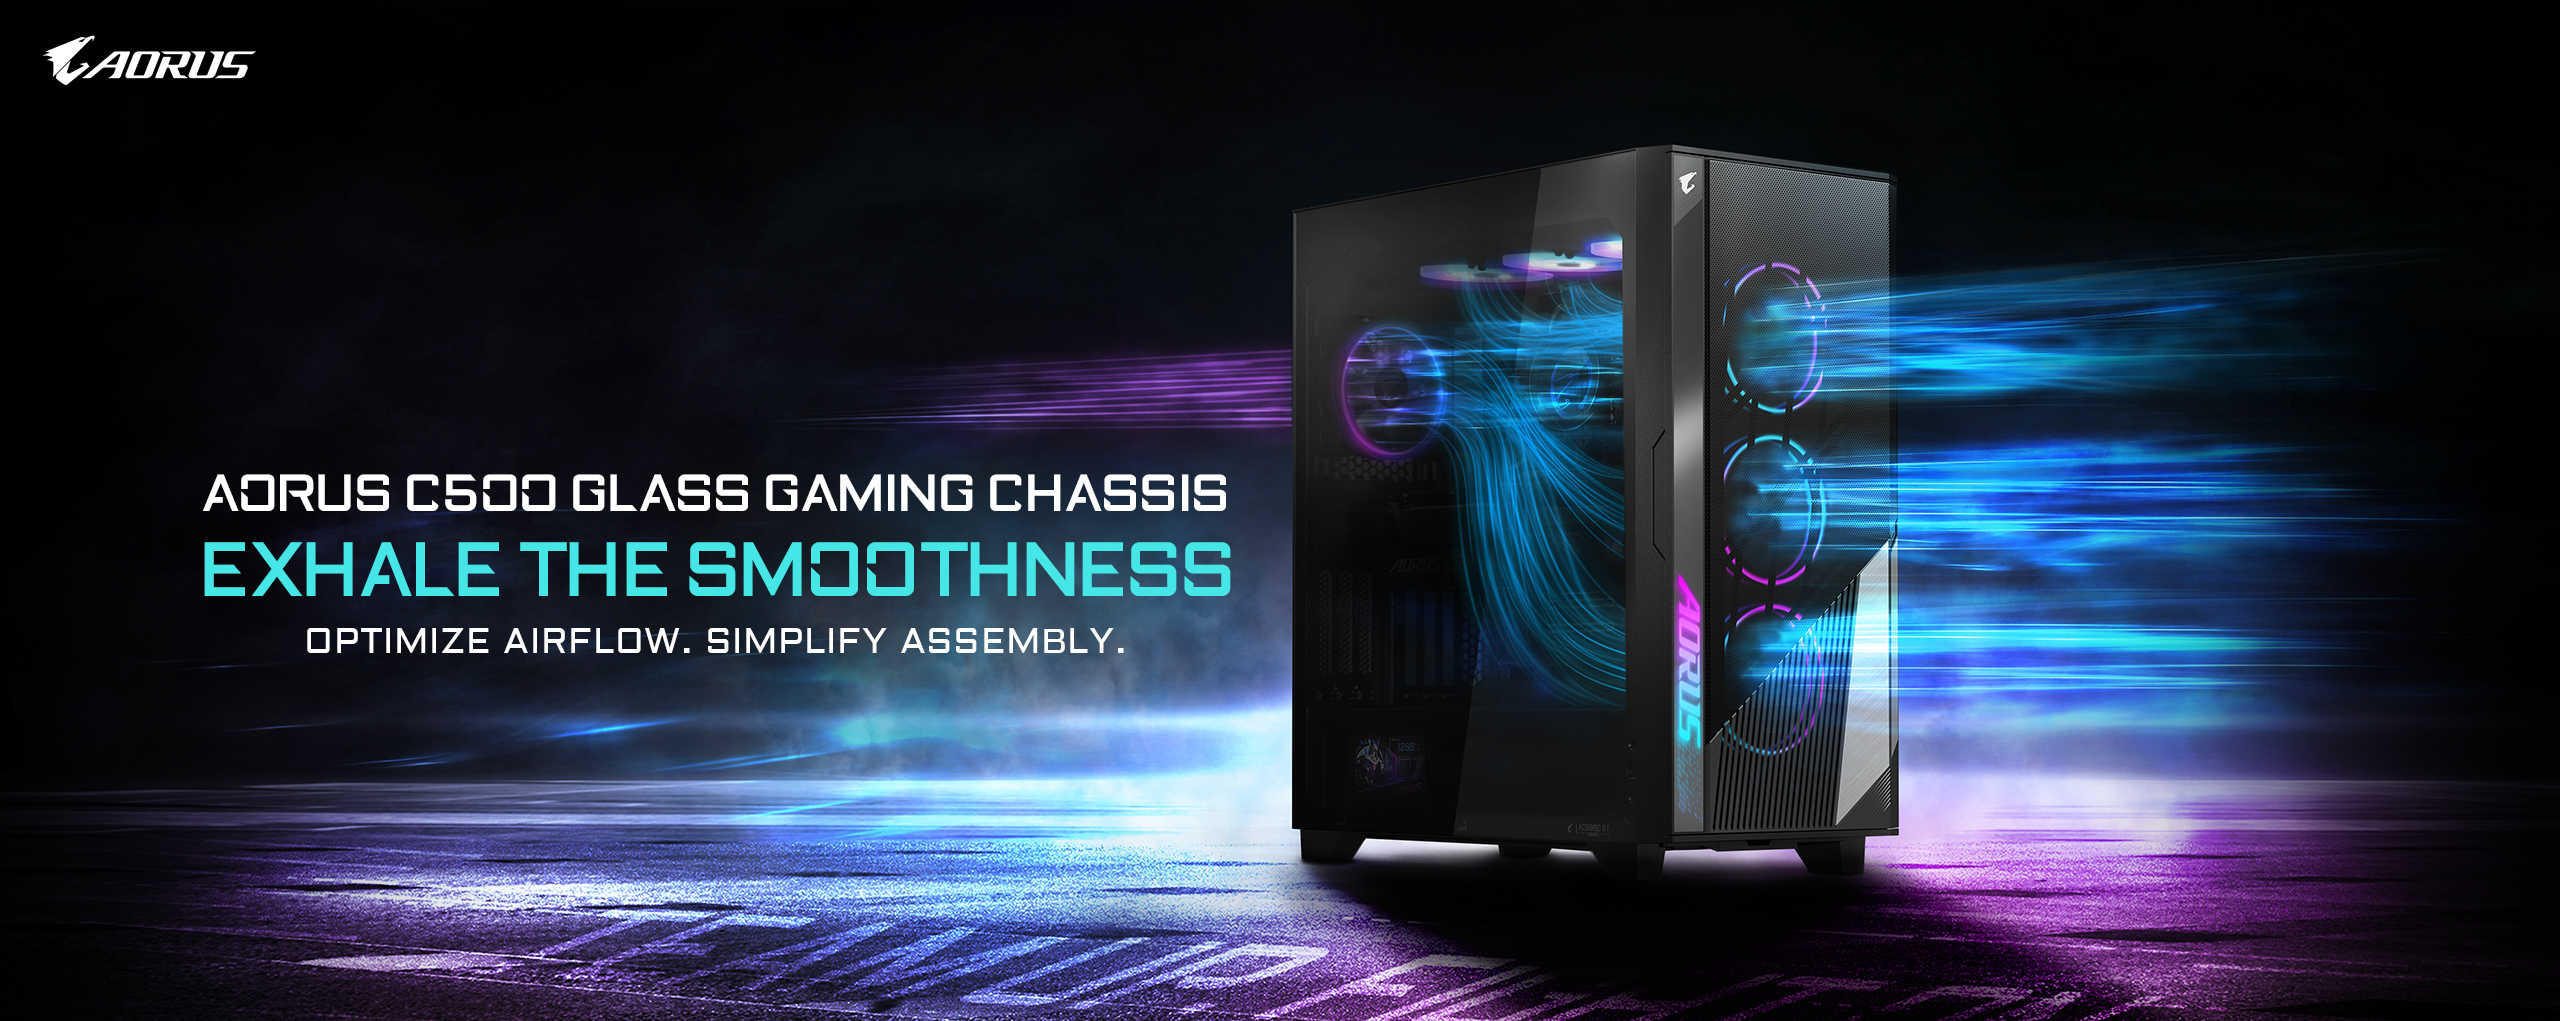 GIGABYTE Launches the New Gaming Case – AORUS C500 GLASS